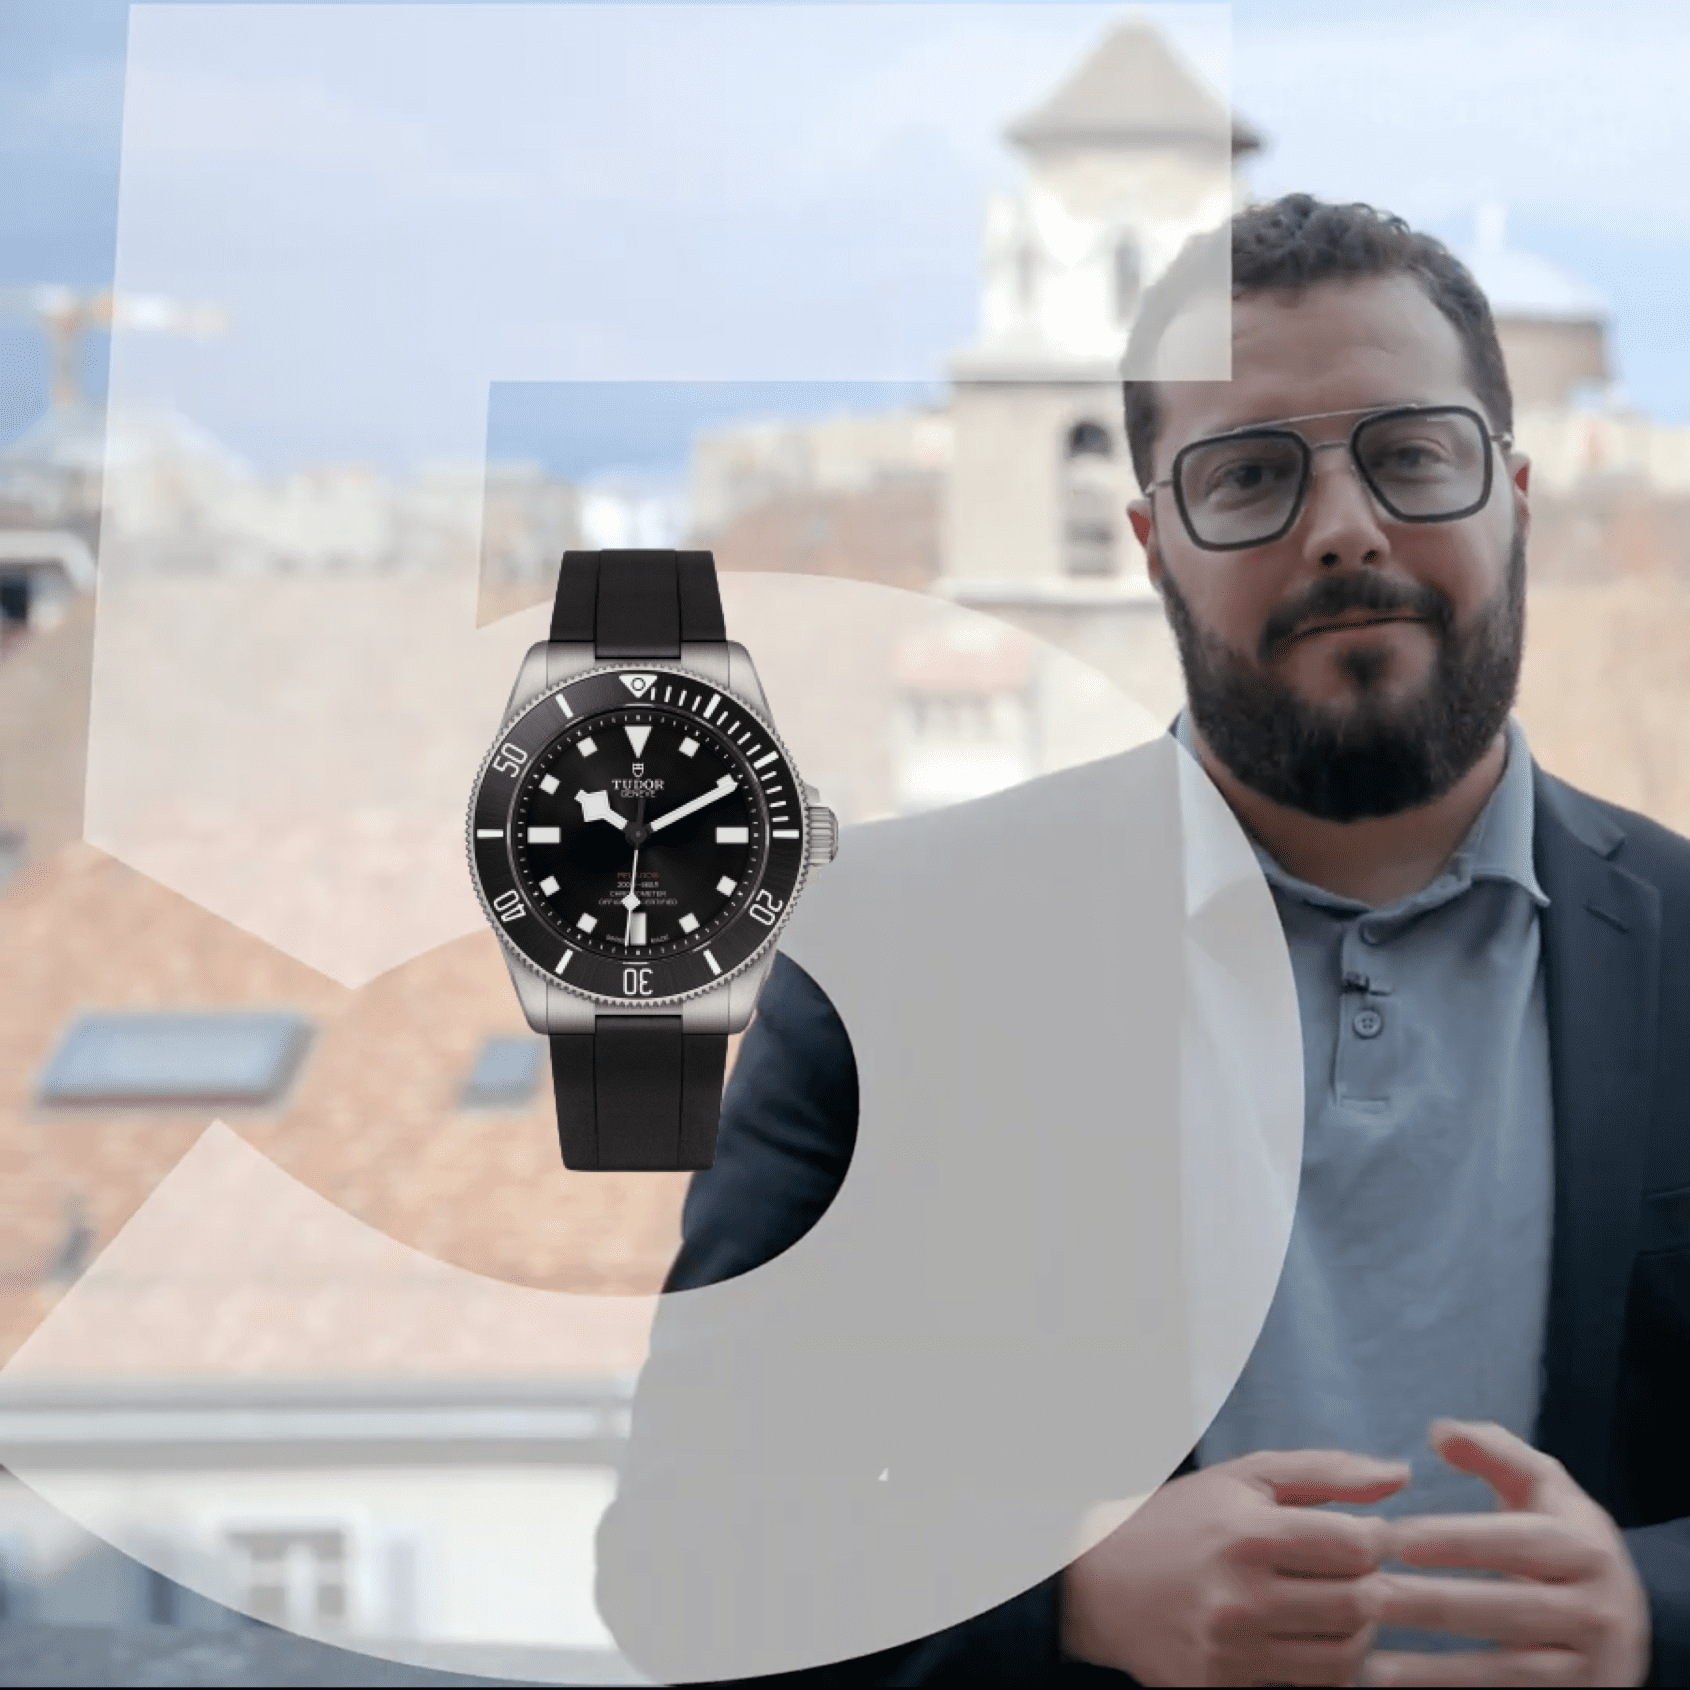 VIDEO: Zach picks his 5 favourite recent watch releases